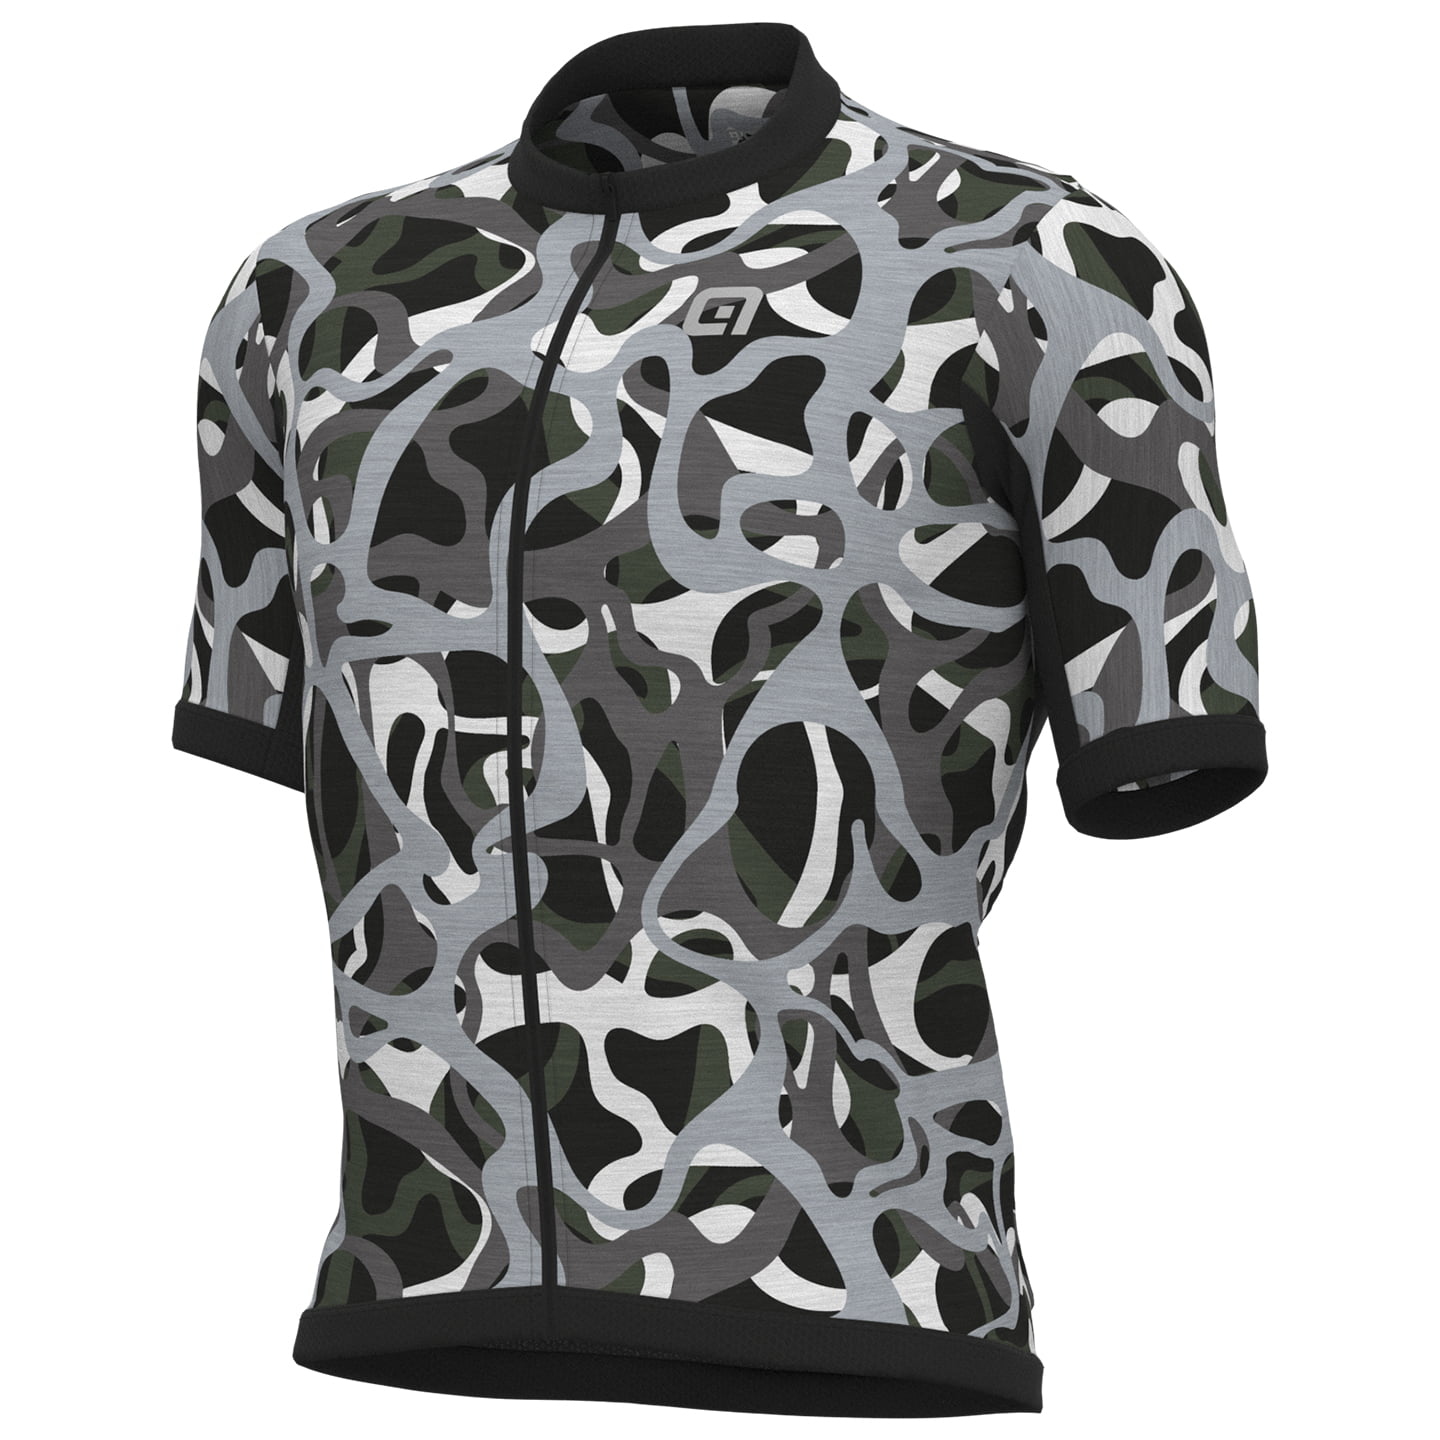 ALE Woodland Short Sleeve Jersey Short Sleeve Jersey, for men, size L, Cycling jersey, Cycling clothing